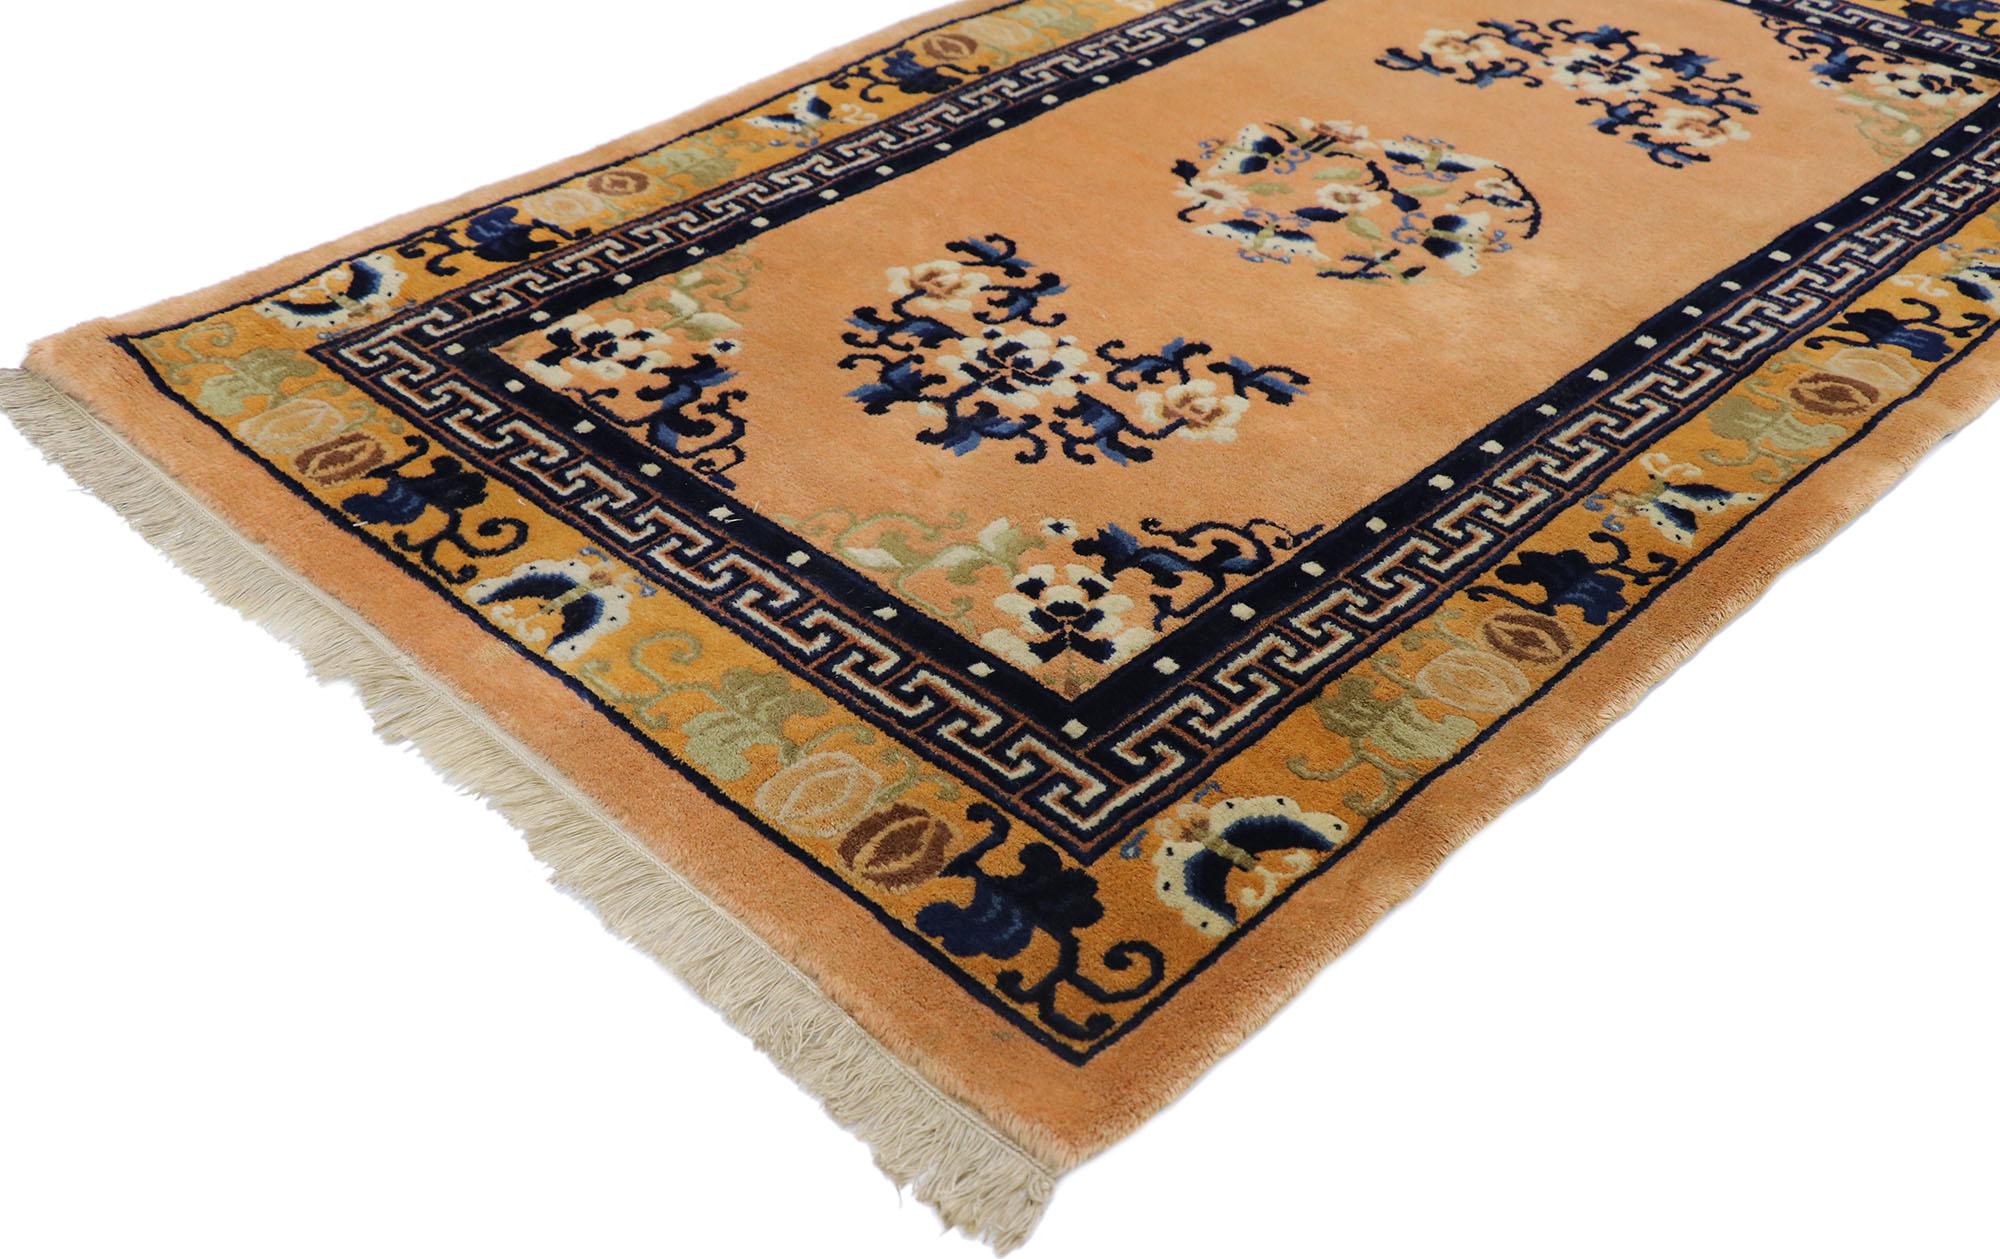 77591 Antique Chinese Peking rug with Chinoiserie Chic Style 03'00 x 05'01. This hand-knotted wool antique Chinese Peking rug features a rounded open center medallion floating on an abrashed orange hued field. The medallion is comprised of a swirl